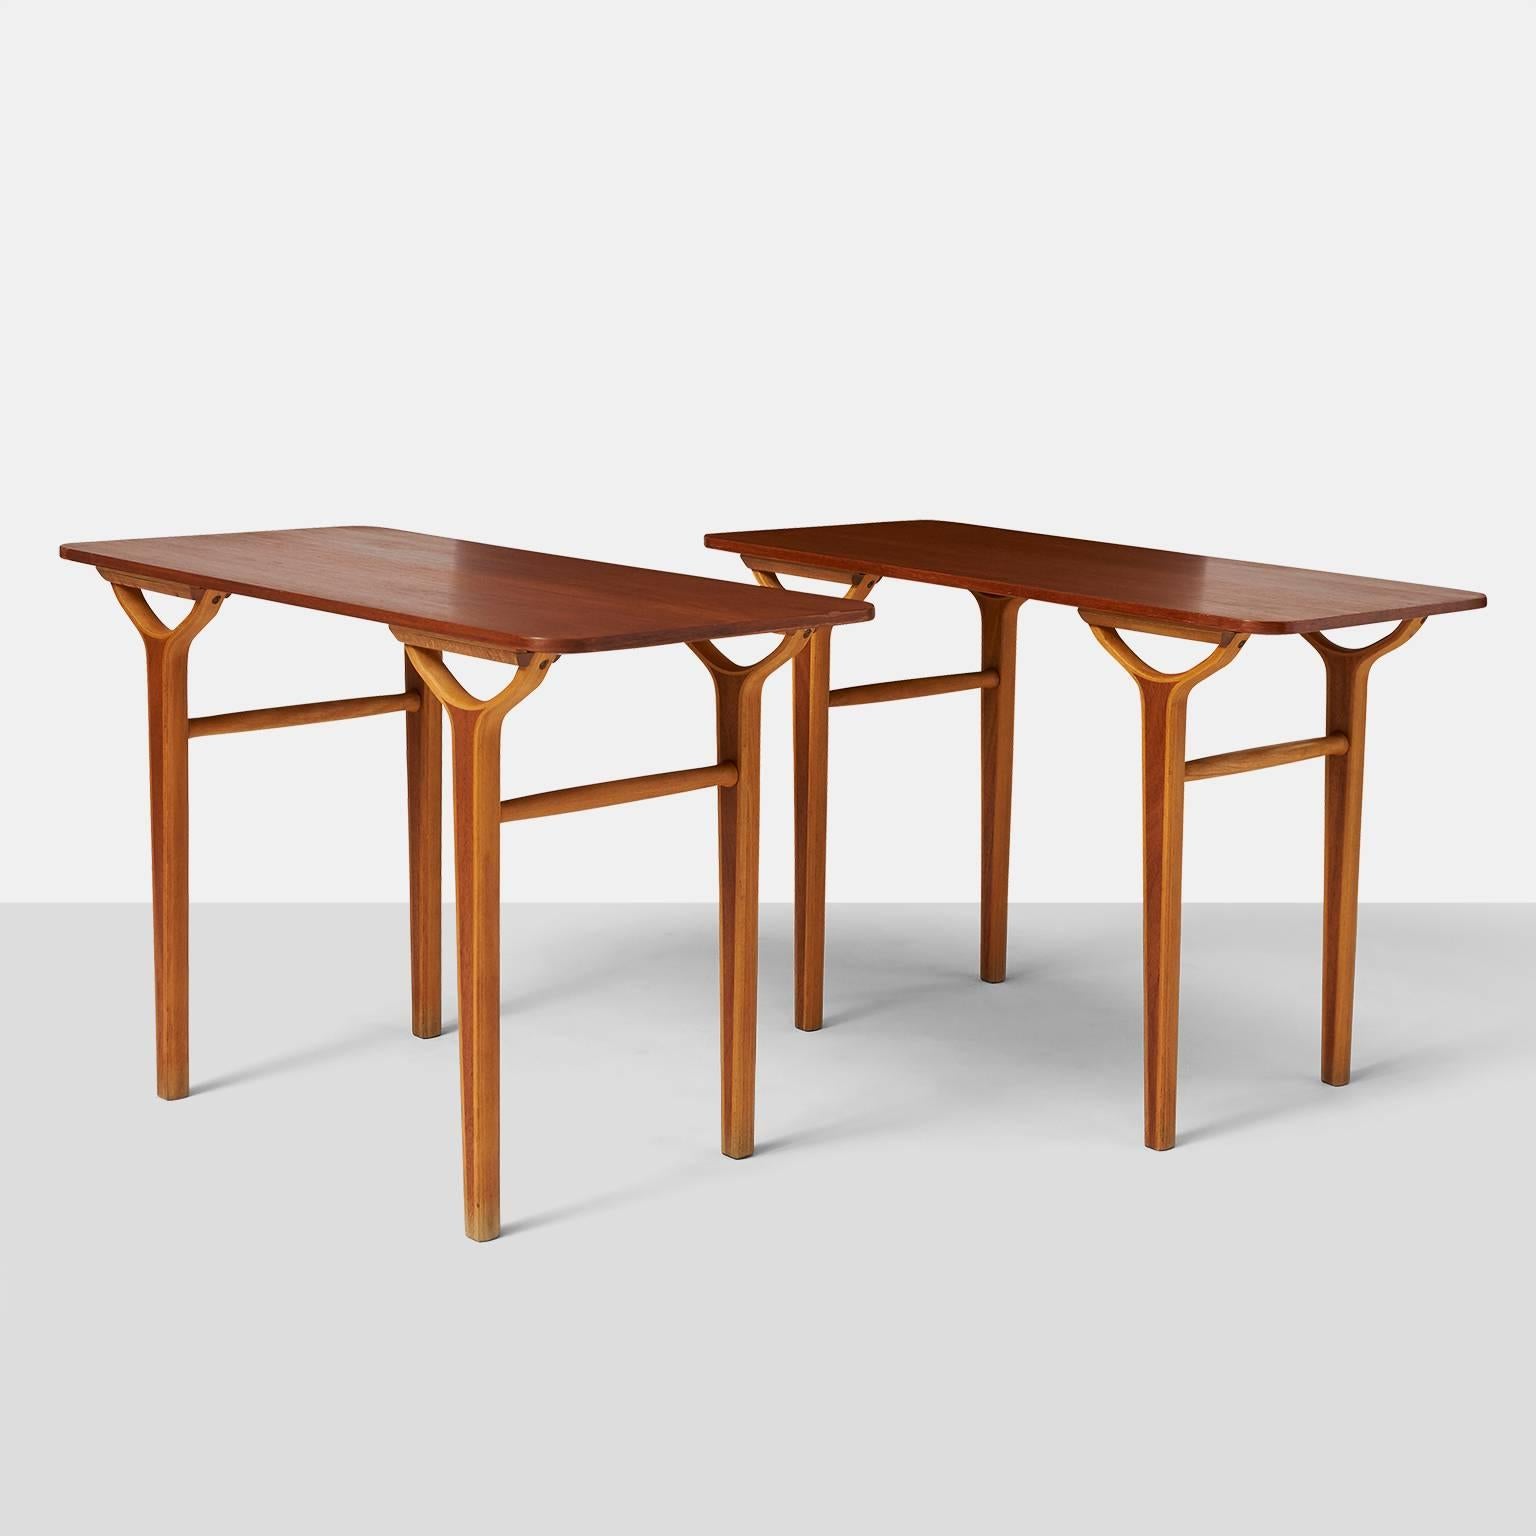 Peter Hvidt & Orla Molgaard Nielsen AX series side tables.
A rare pair of side tables in teak and beech form the AX series for Fritz Hansen.
Denmark, circa 1950s.